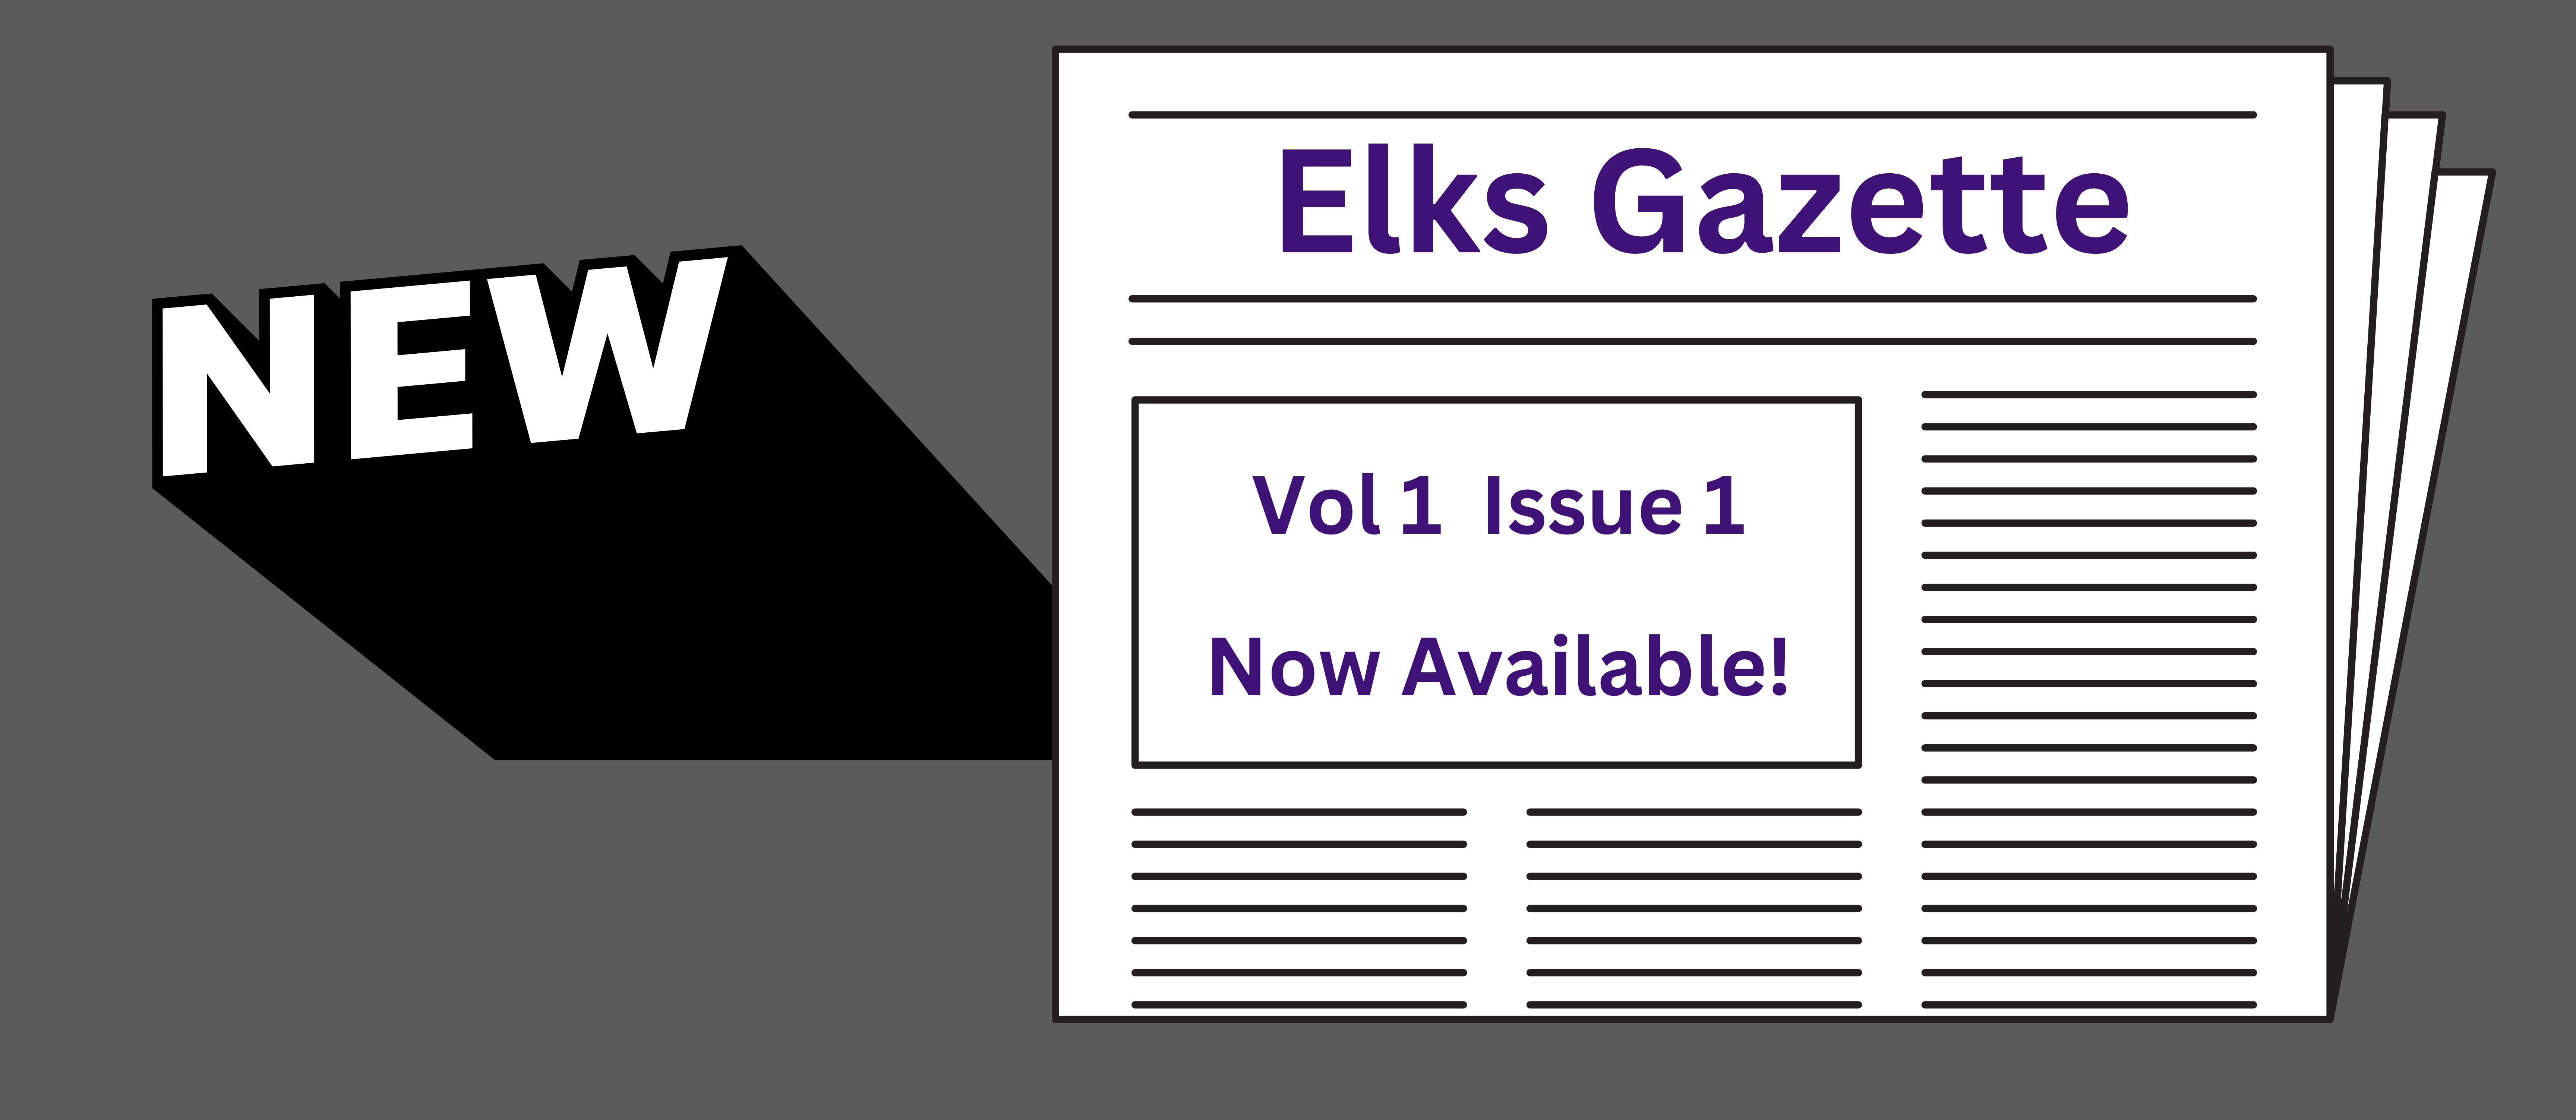 New! Elks Gazette Vol 1 Issue 1, Now Available!